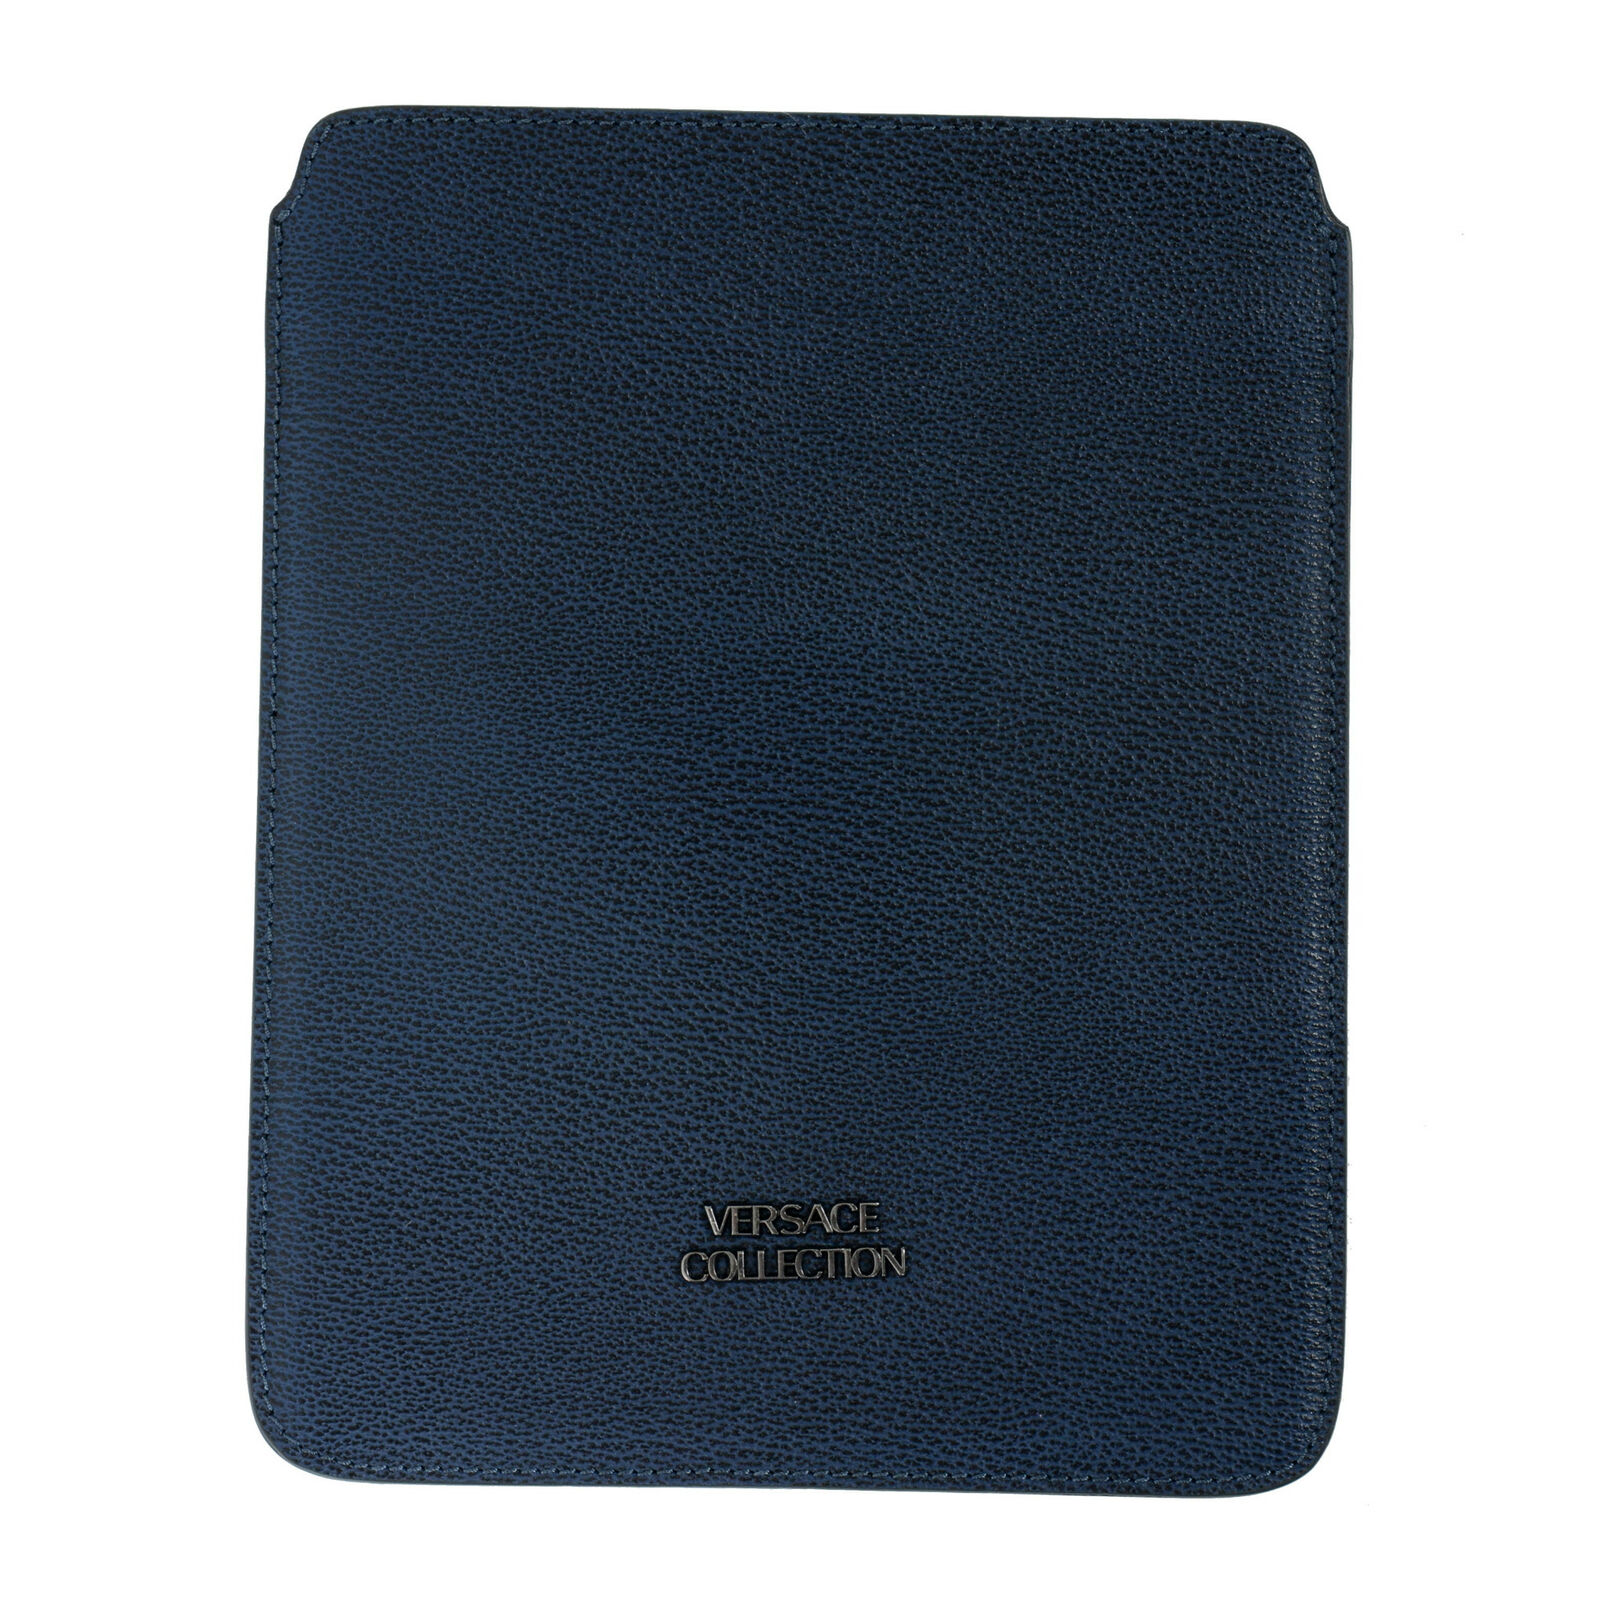 Versace Collection Navy Blue Textured Leather Cover Case